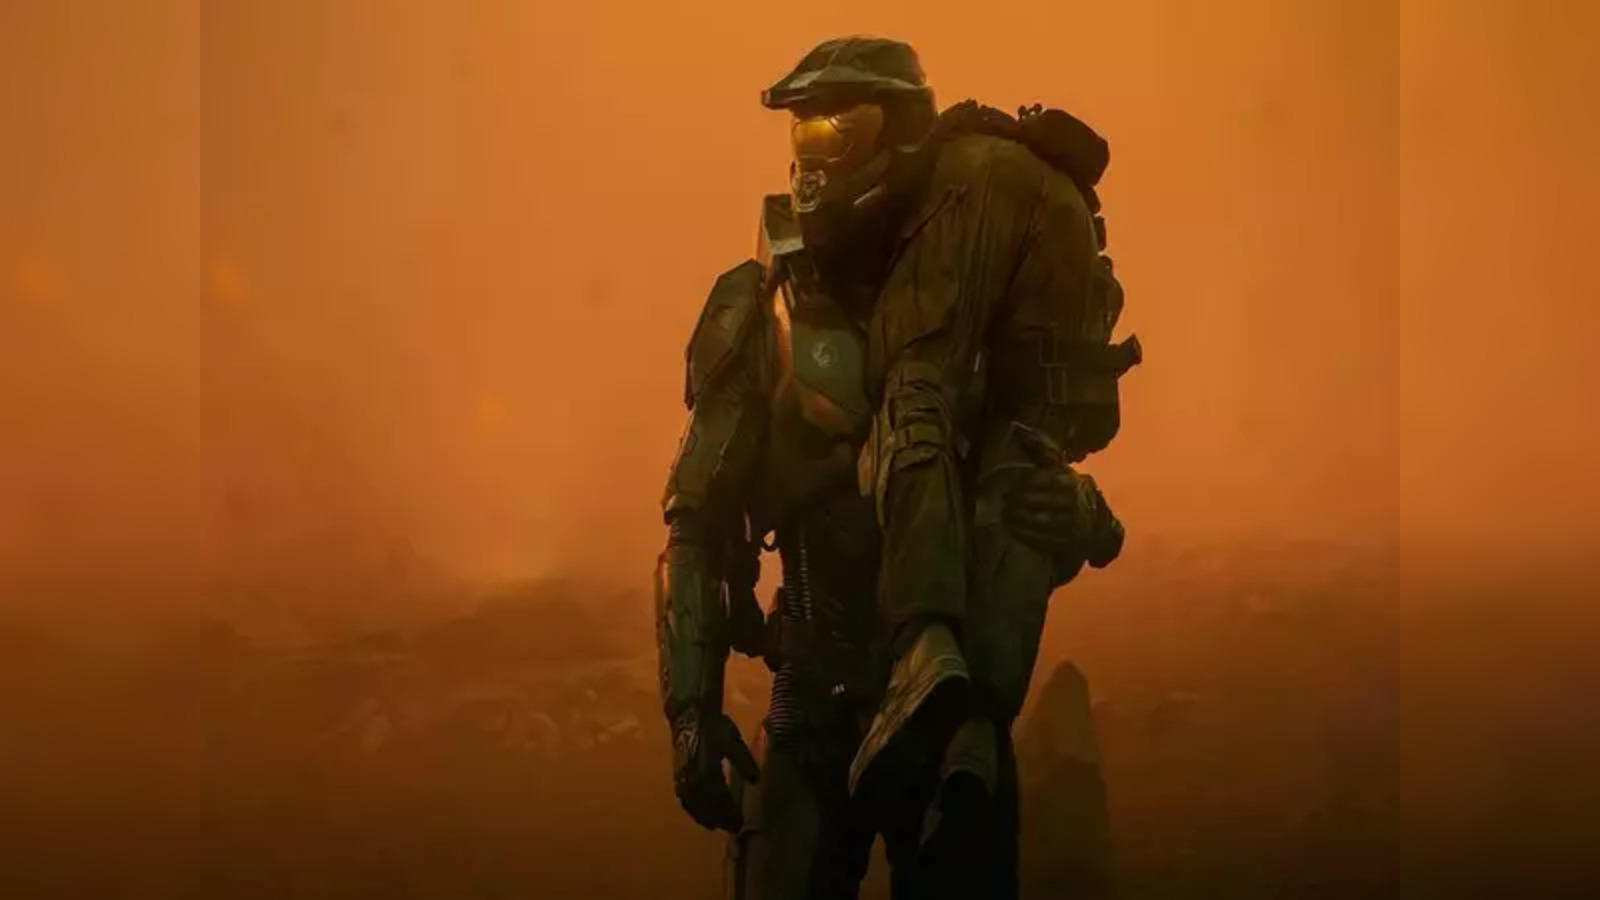 Halo The Series: Paramount Releases New Trailer Ahead Of Next